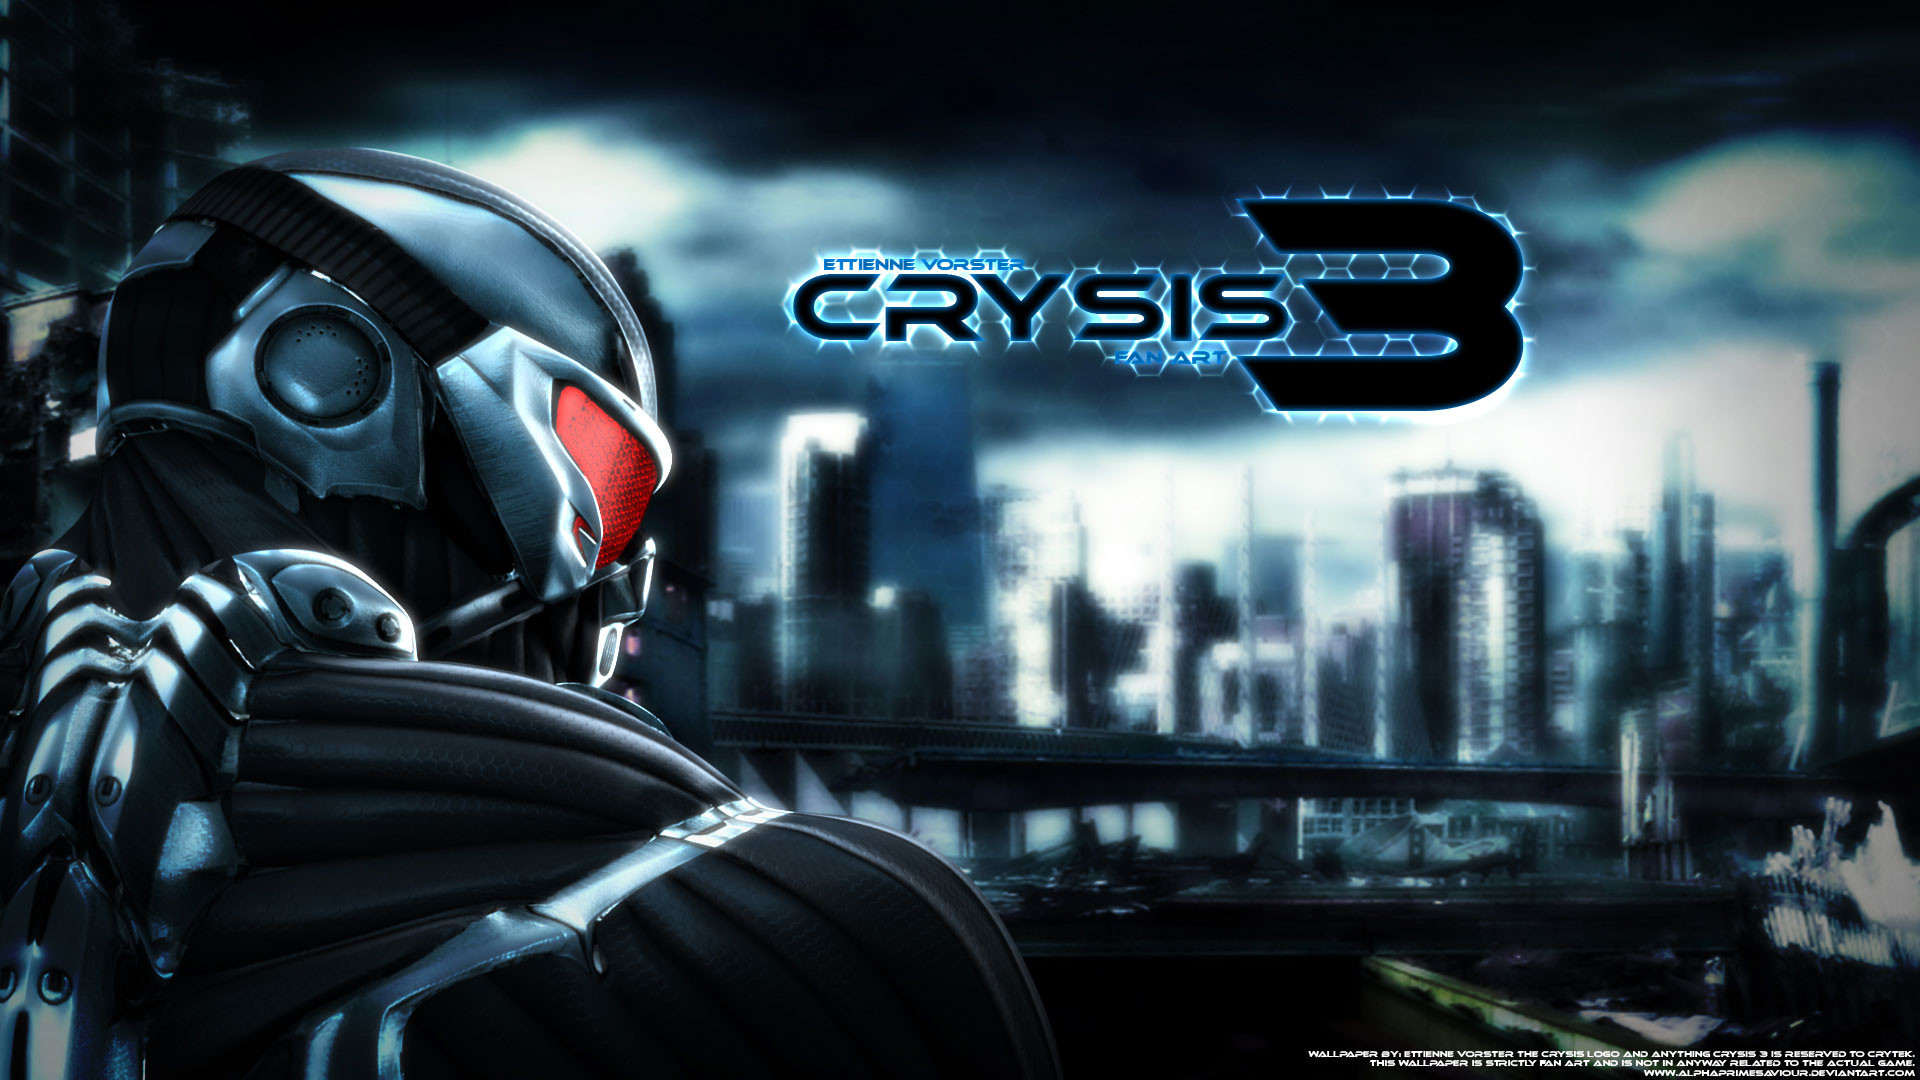 1920x1080 Crysis 3 Exclusive HD Game Wallpapers for Desktop | Game HD Wallpaper